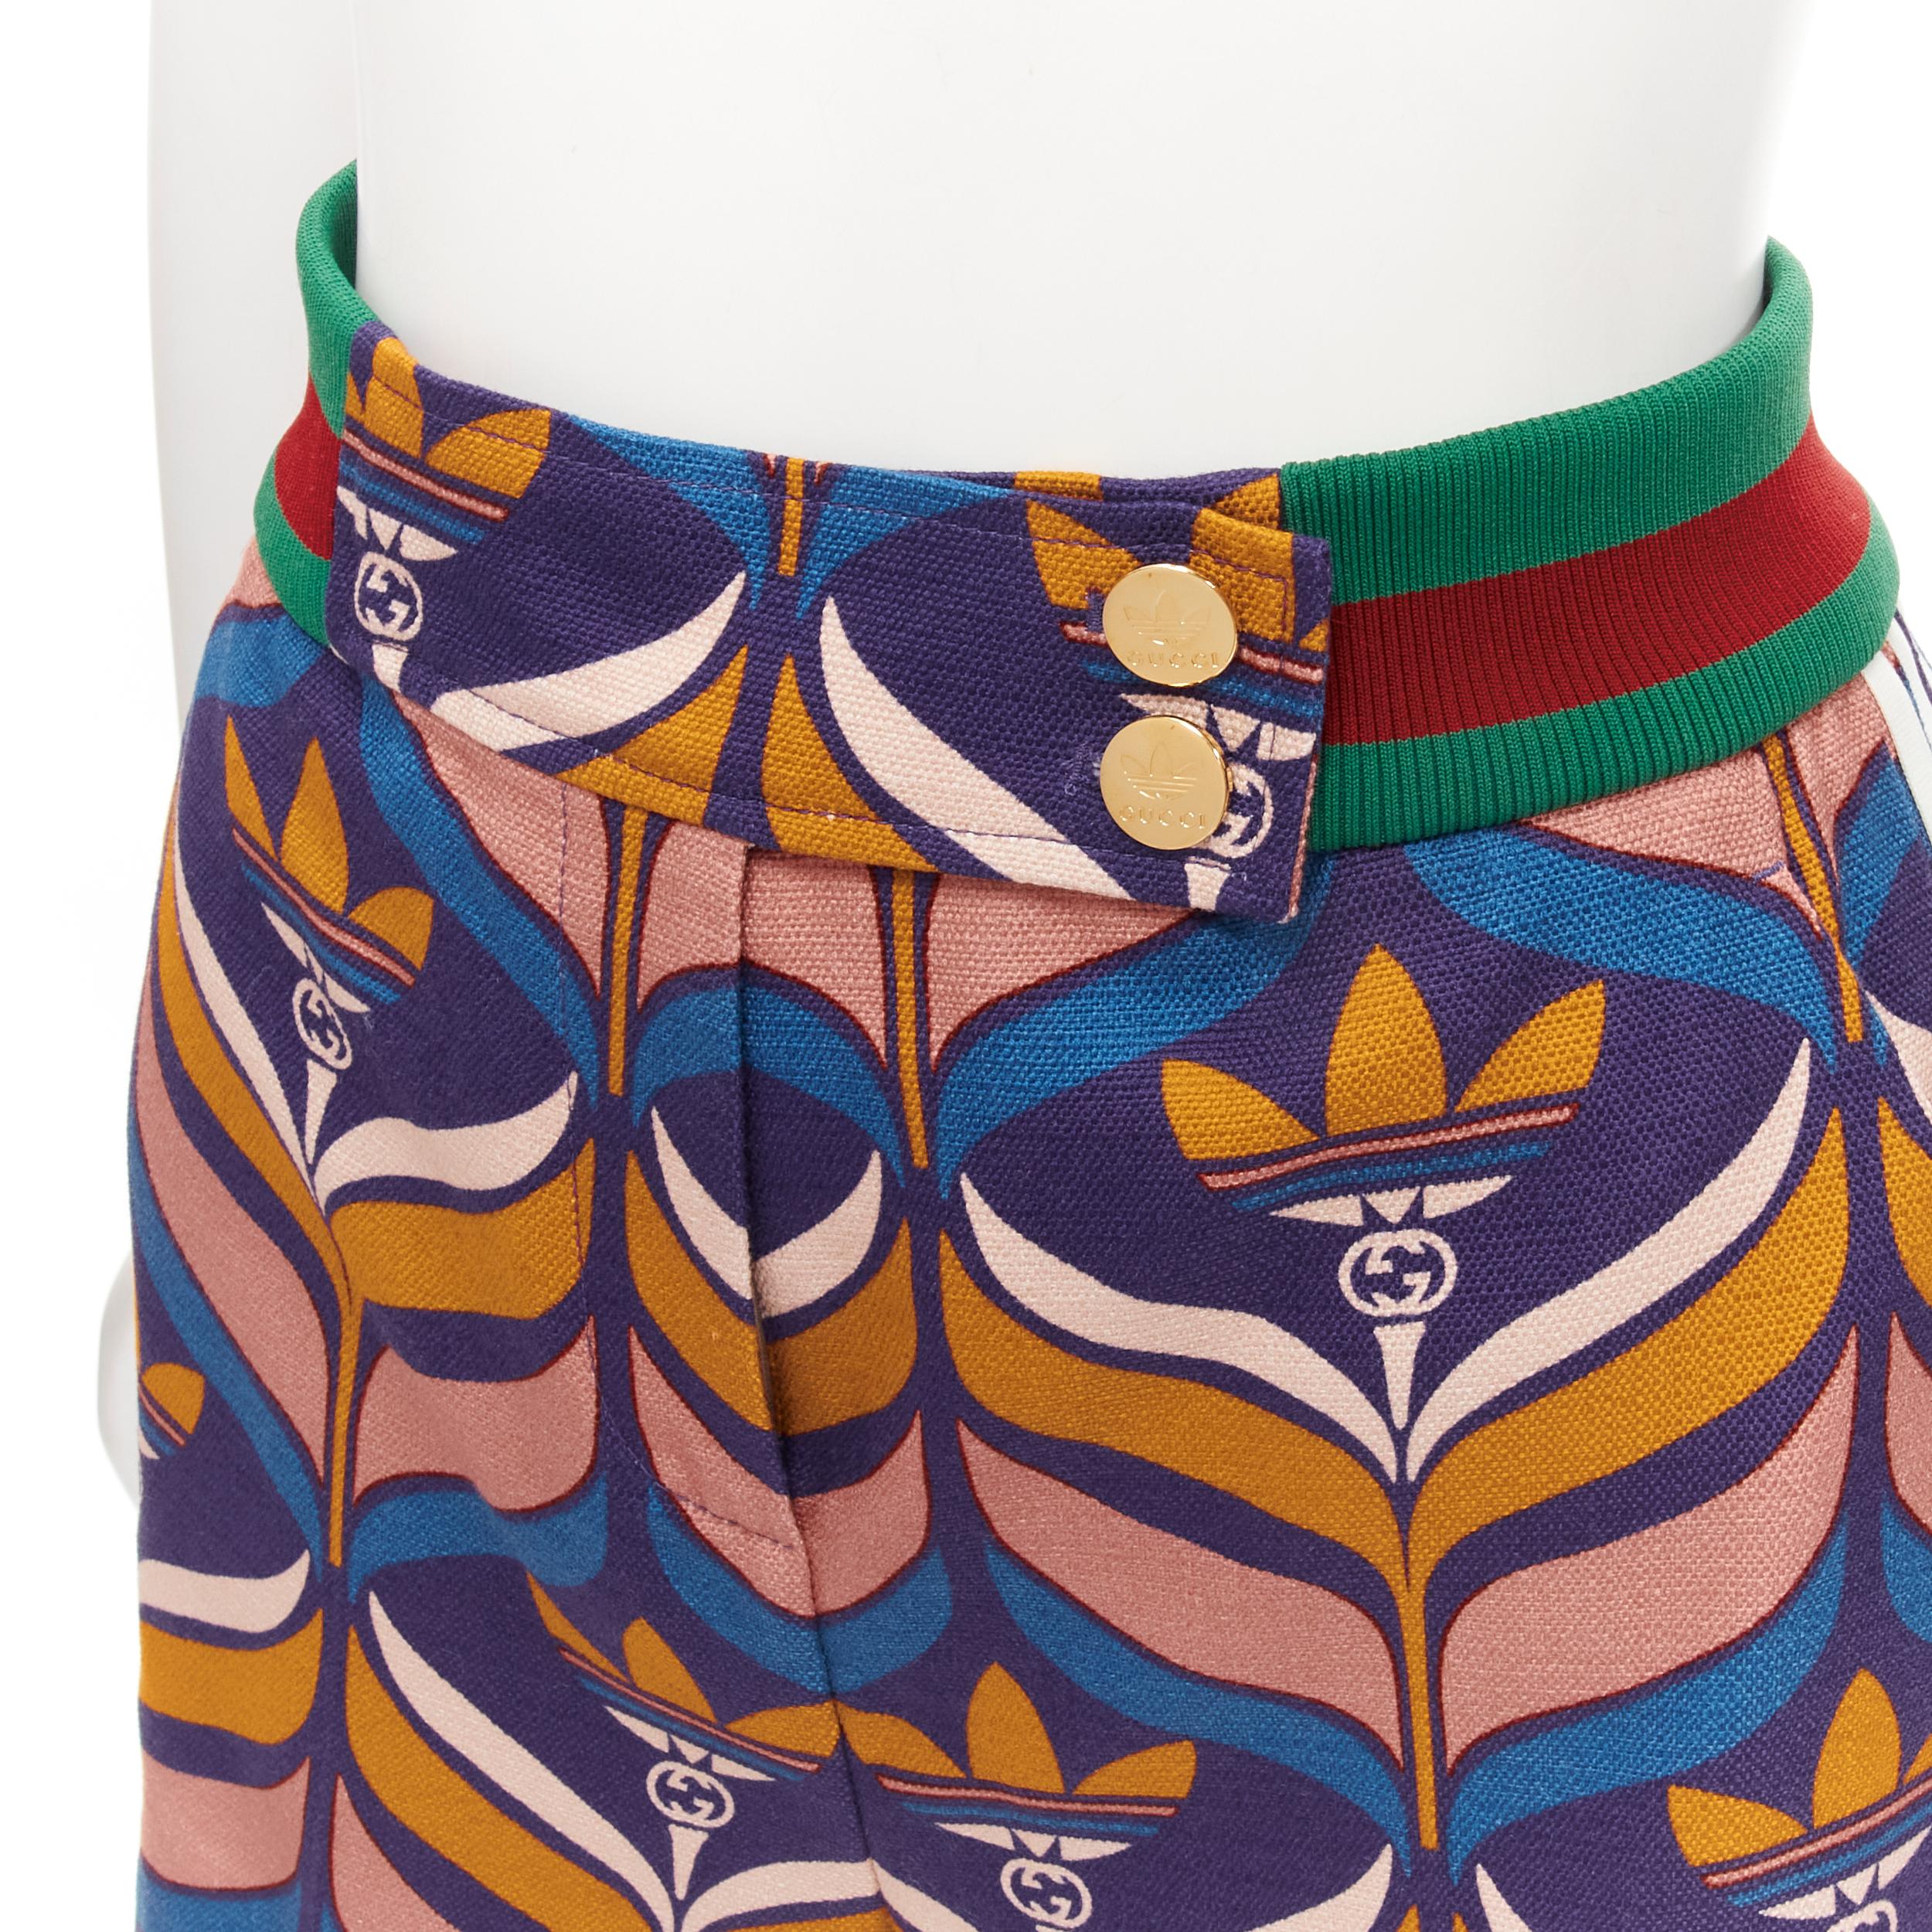 GUCCI ADIDAS 2022 Trefoil logo print web waist 3-striped shorts IT38 XS
Brand: Gucci
Collection: X Adidas 2022 
Material: Cotton
Color: Multicolour
Pattern: Floral
Closure: Zip Fly
Extra Detail: Gold-tone buttons. Signature web waistband. 2-pocket